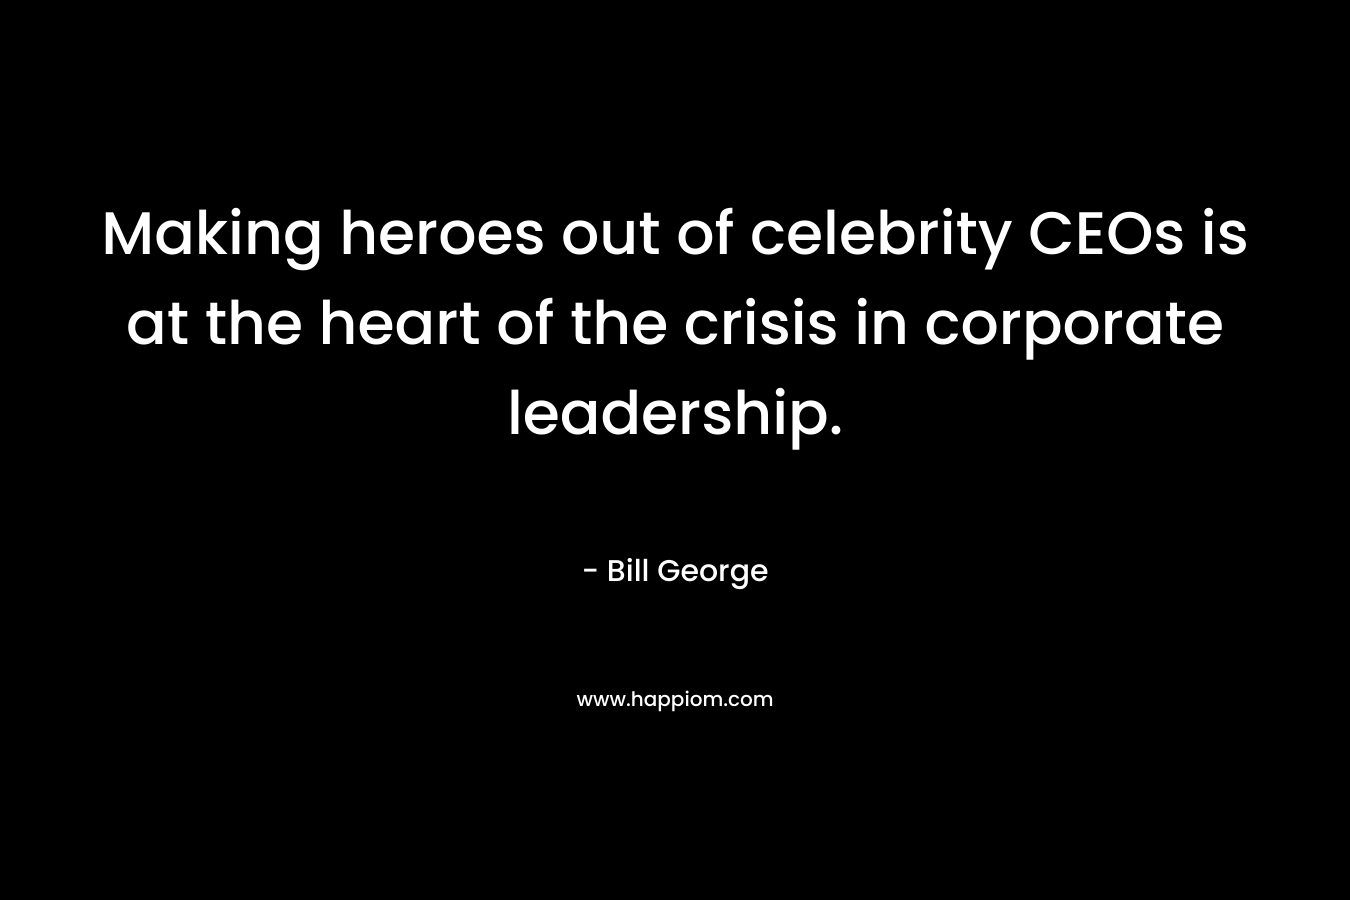 Making heroes out of celebrity CEOs is at the heart of the crisis in corporate leadership. – Bill George